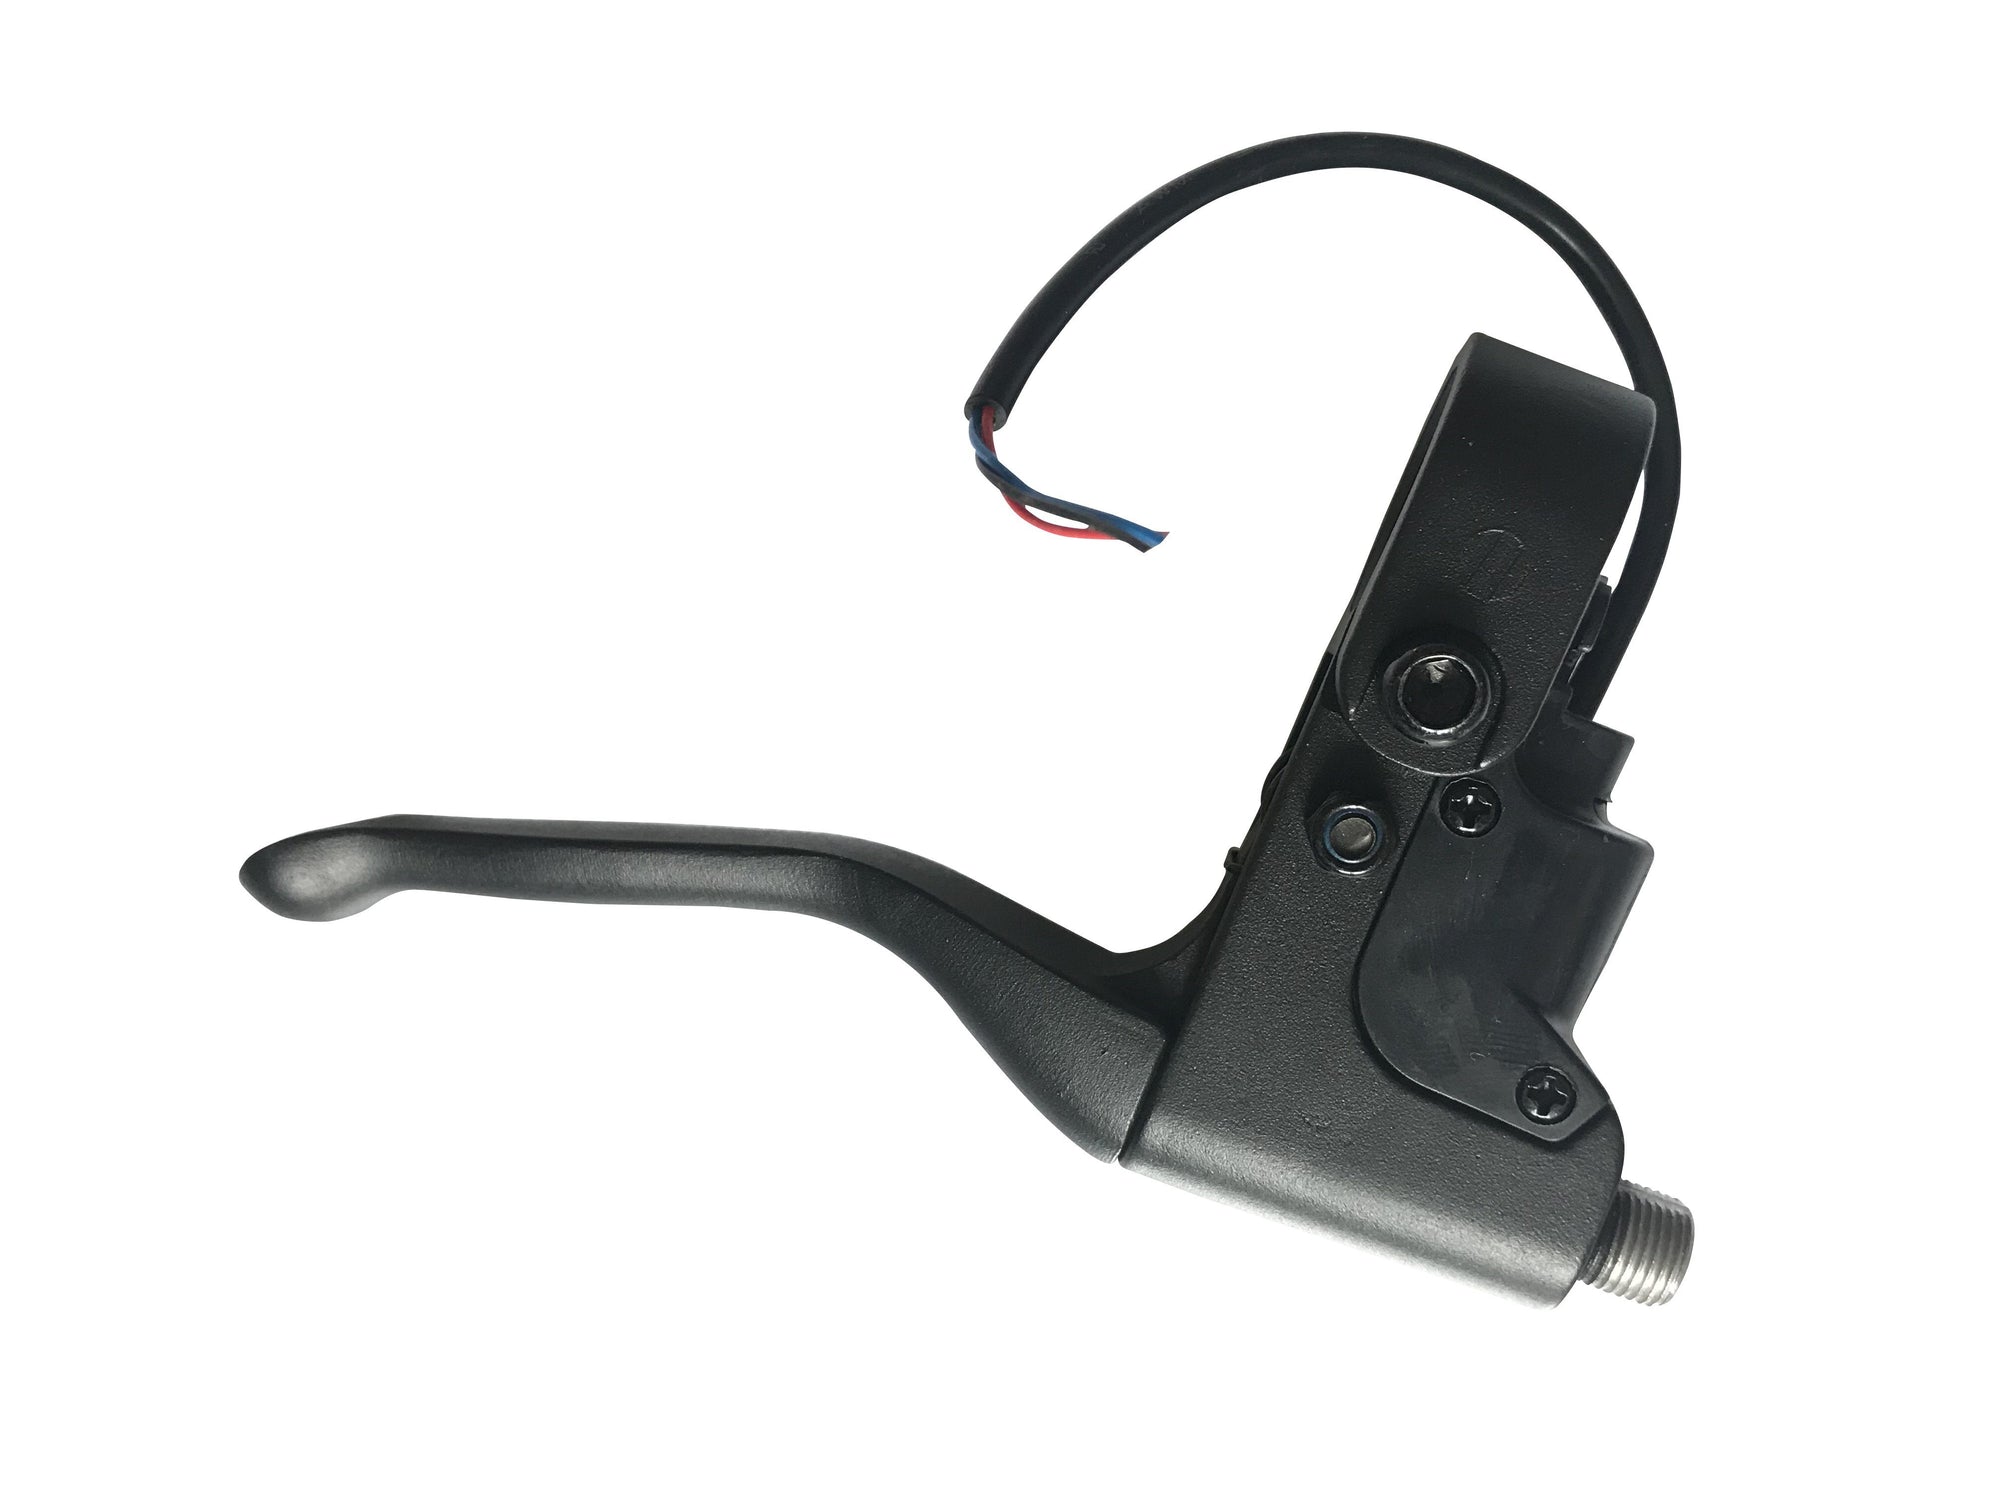 Replacement Break lever for Segway Max 2.0 Kick Scooters